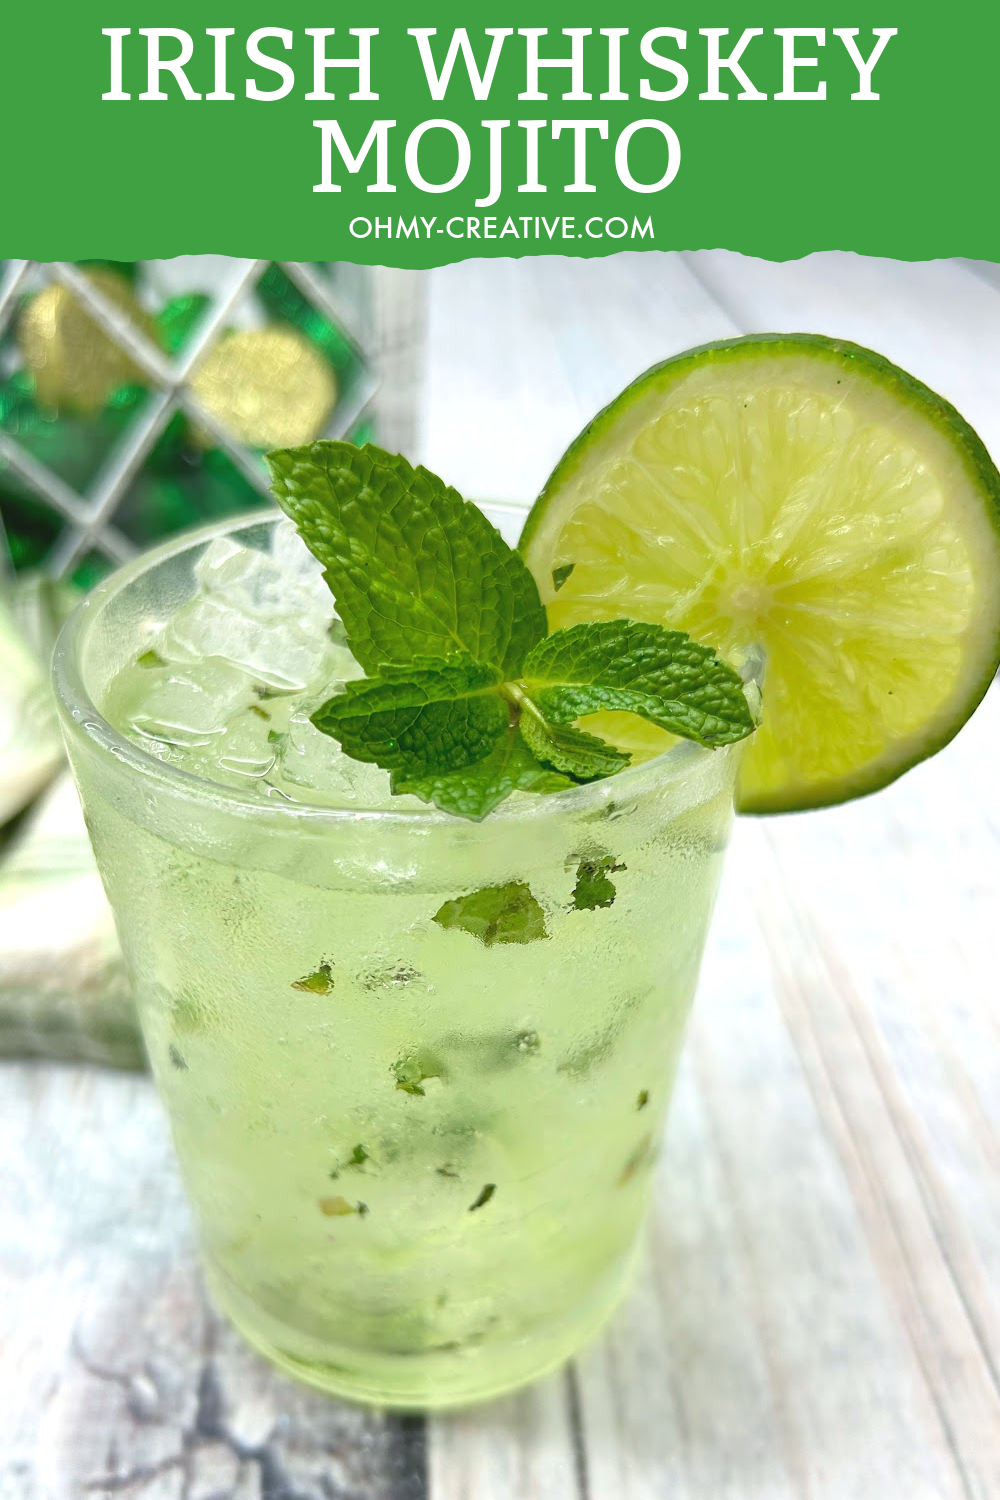 Green Irish Mojito recipe garnished with fresh mint and a slice of lime made with Jamison whiskey.